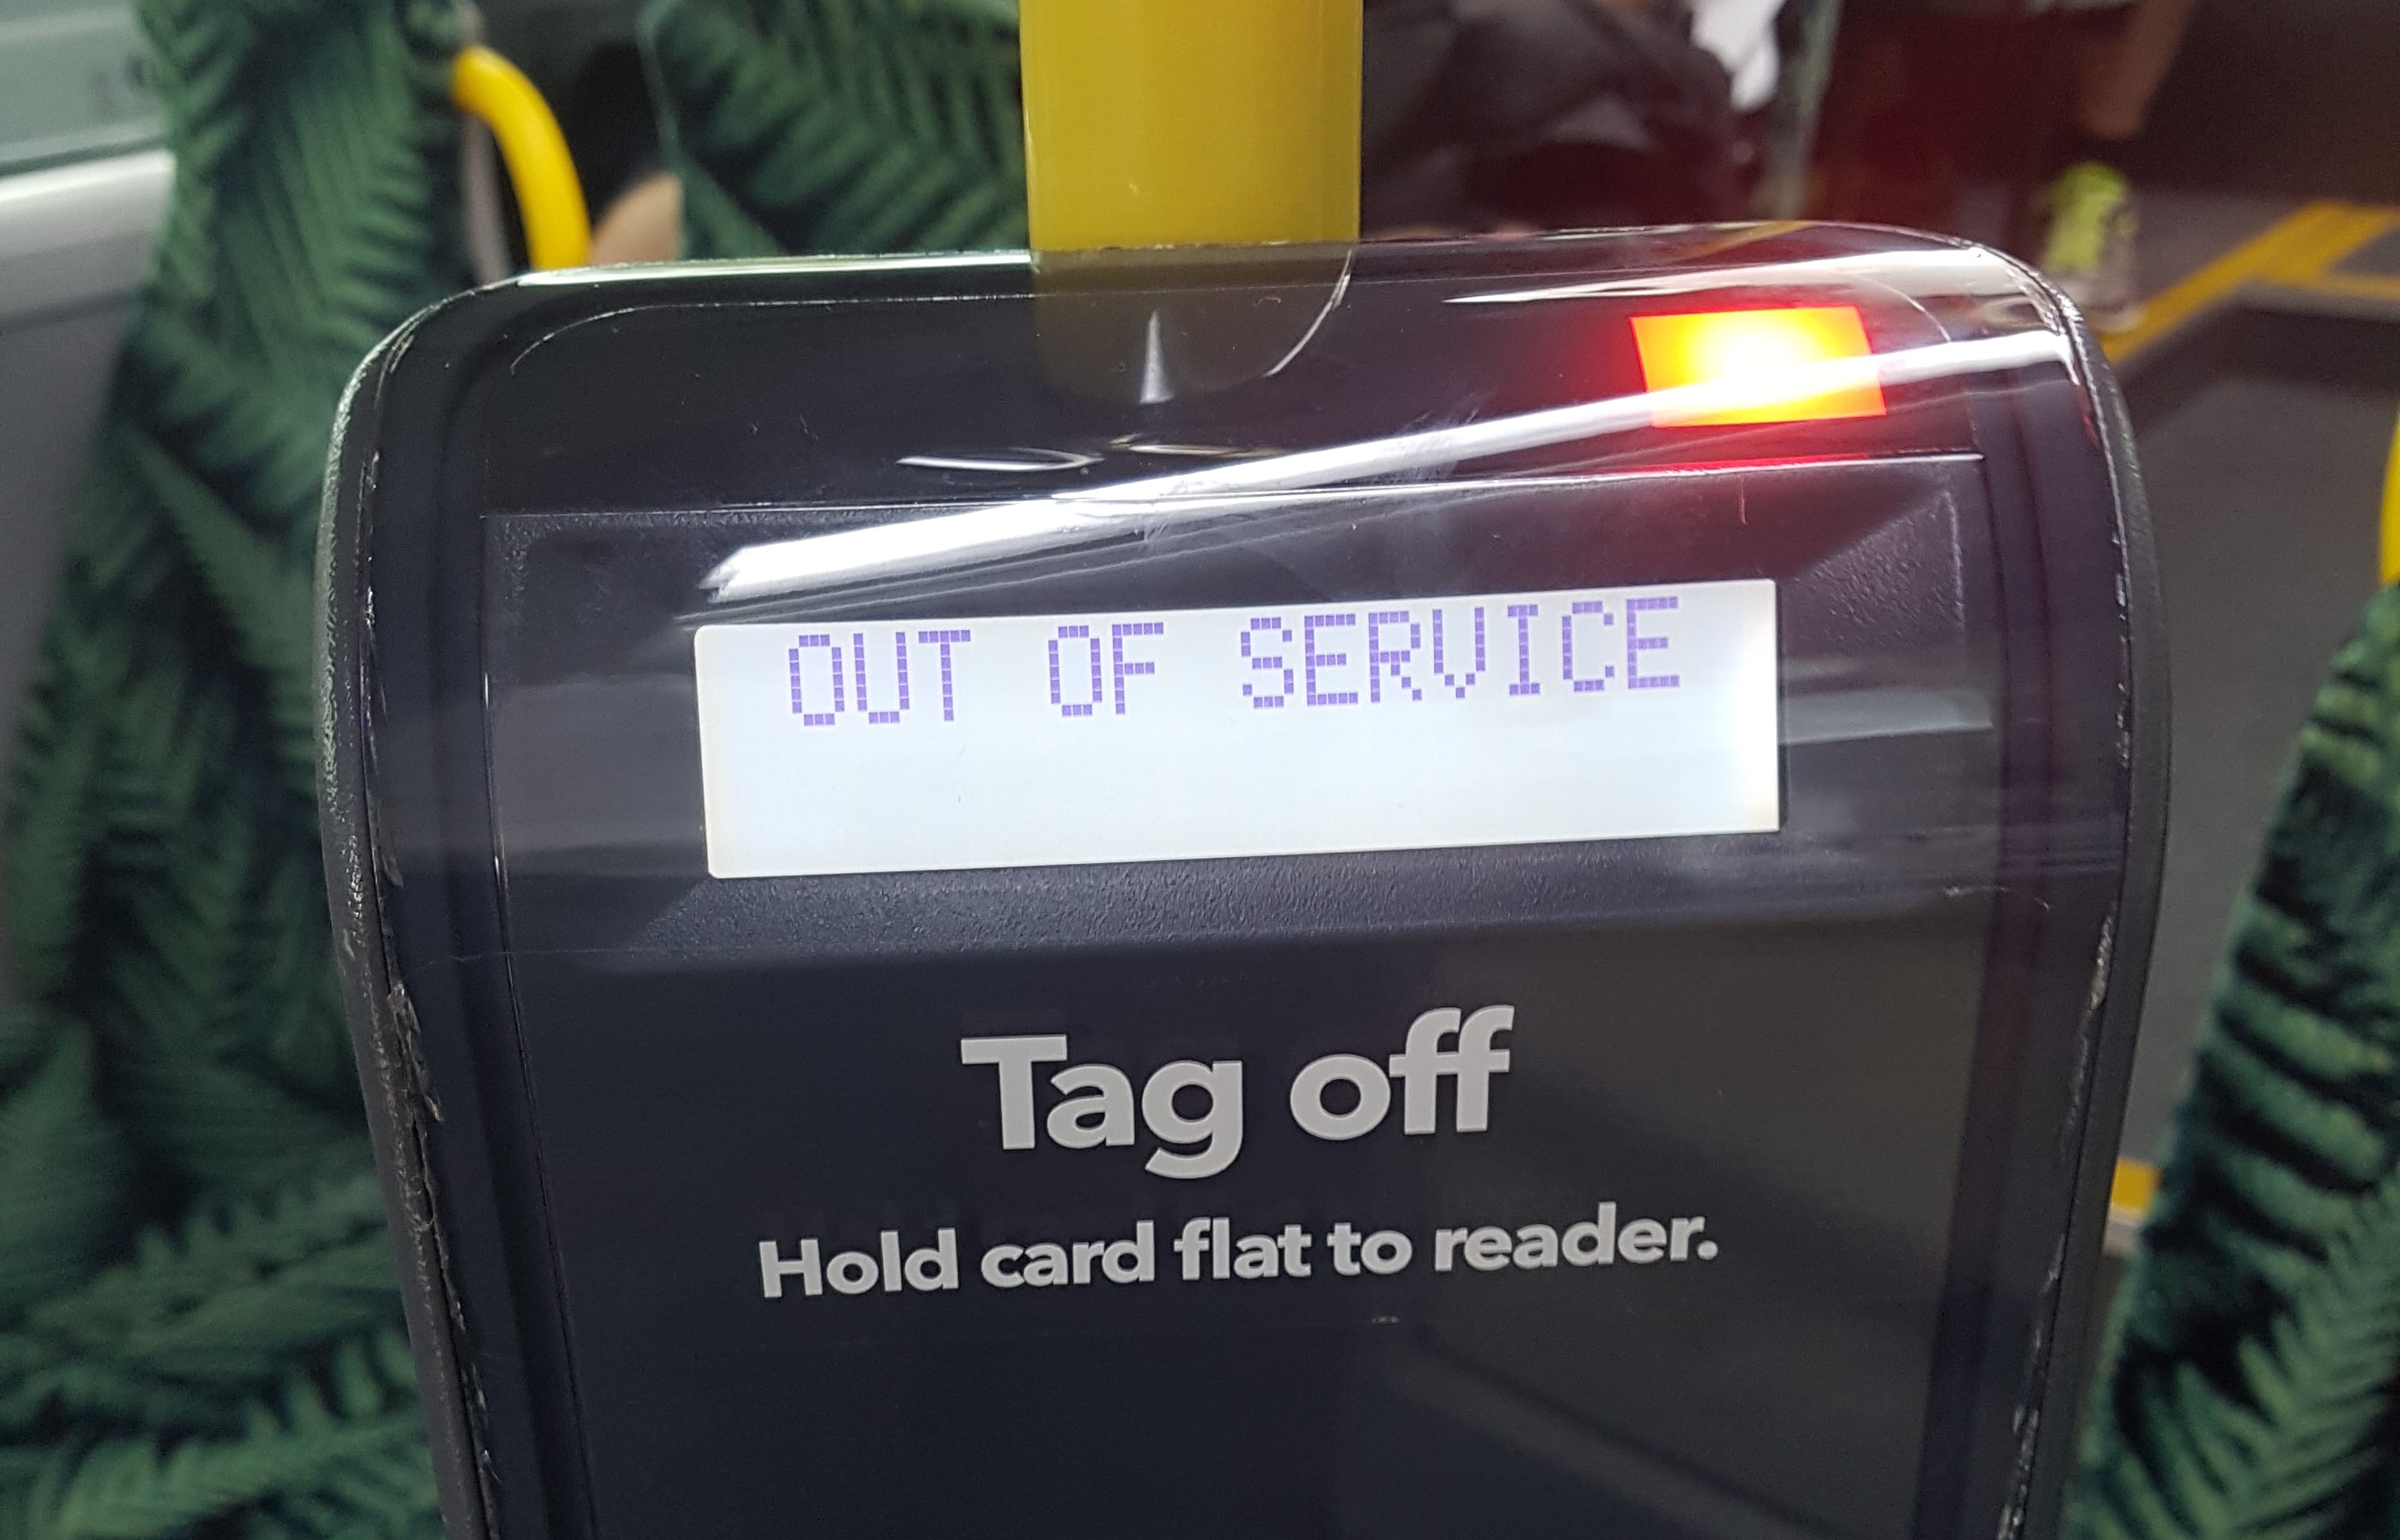 An out-of-service Hop card reader on an Auckland bus.